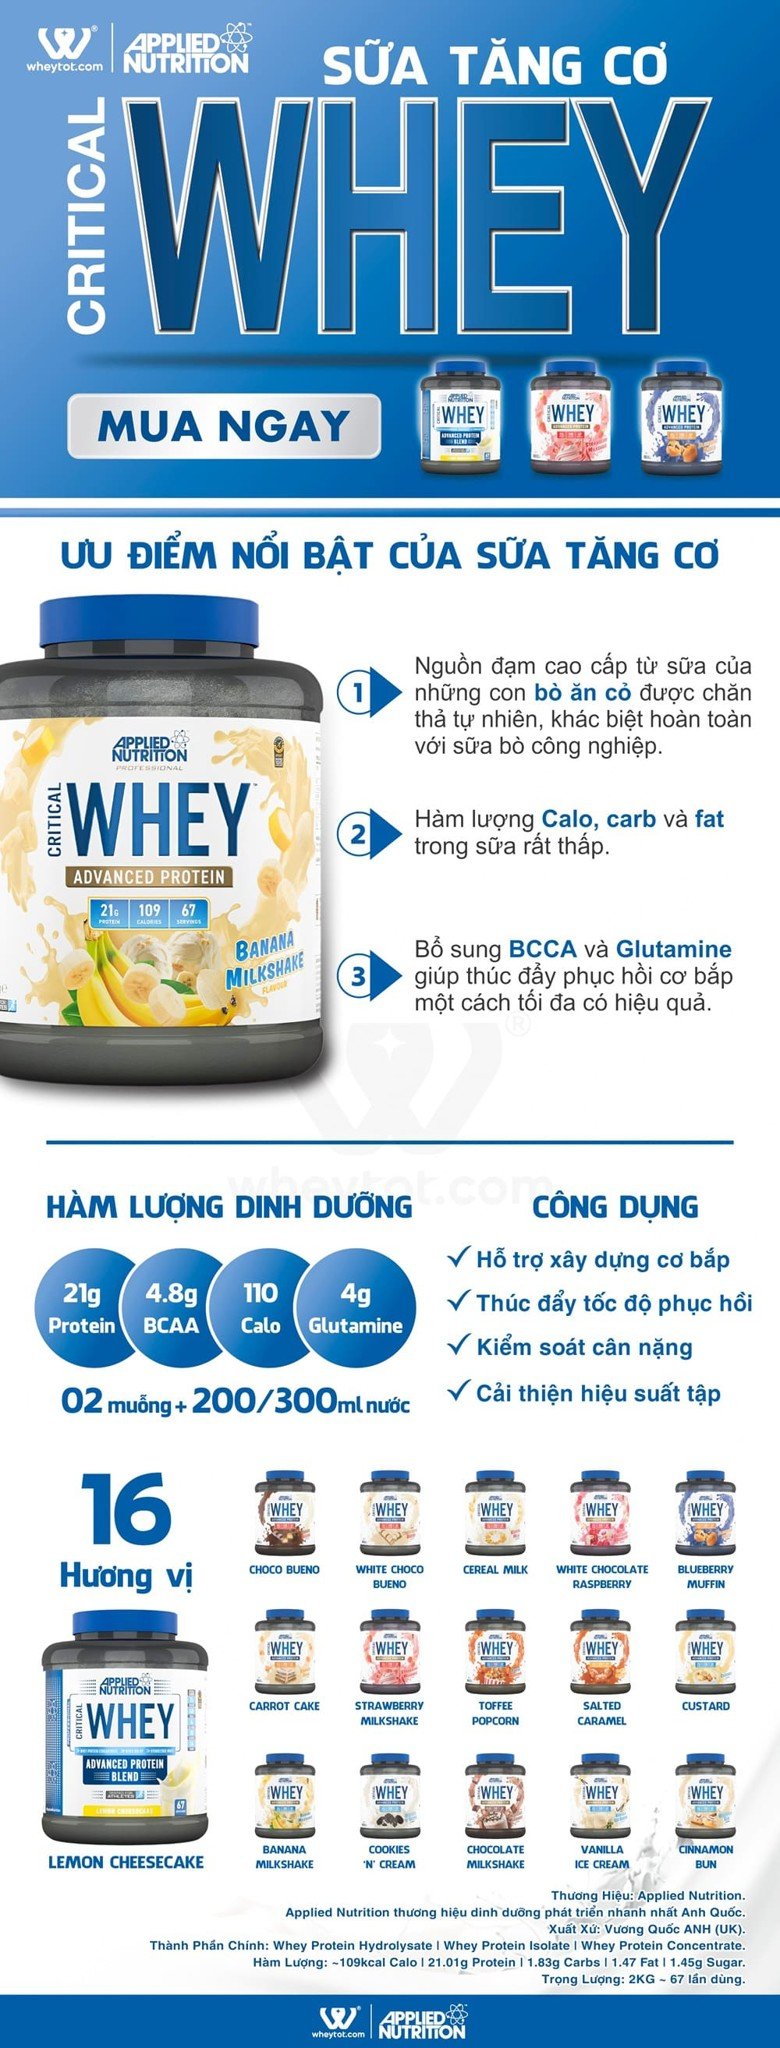 Applied Nutrition Critical Whey Protein Blend